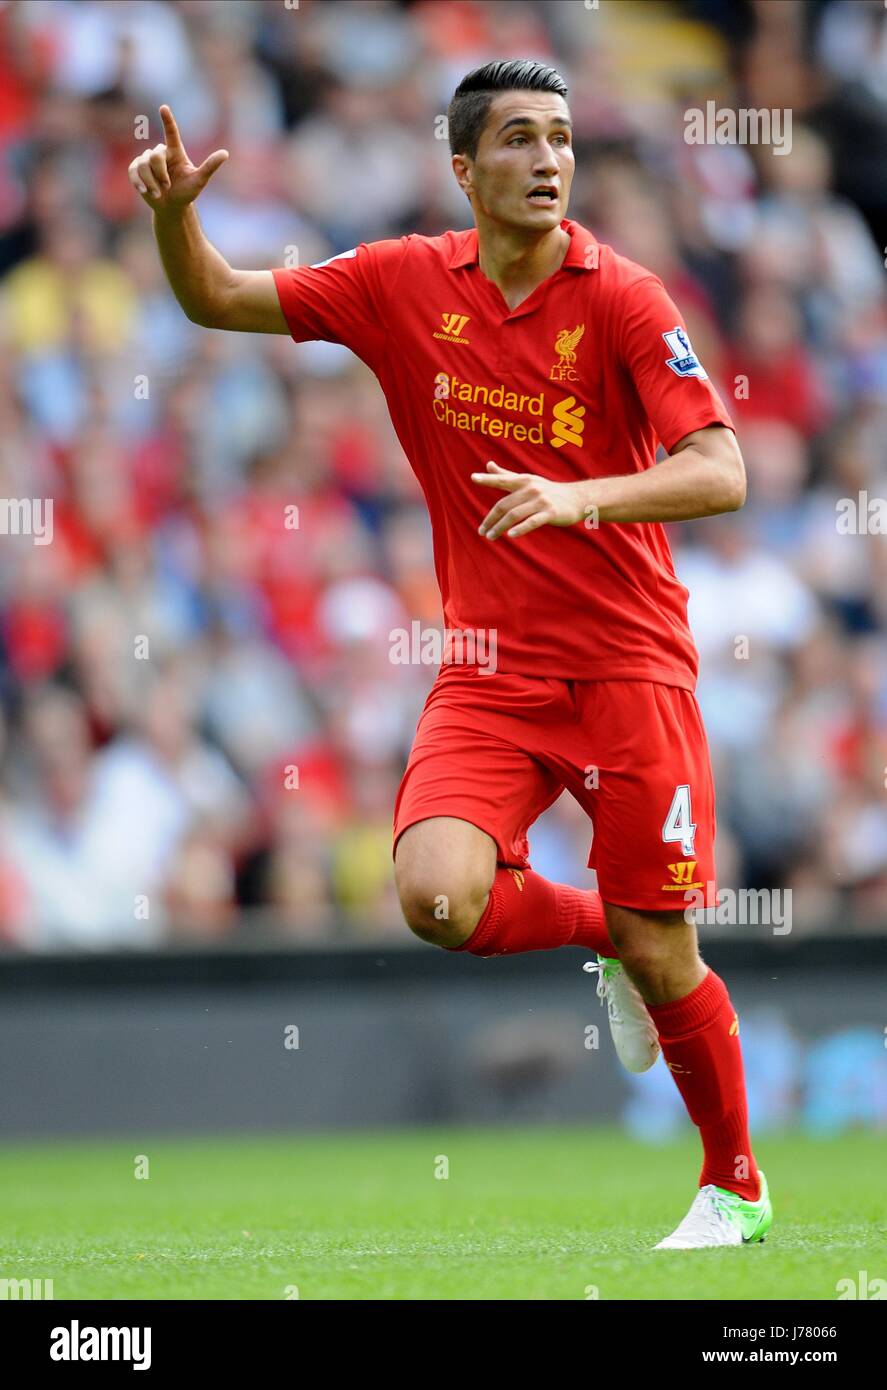 NURI SAHIN FC LIVERPOOL ANFIELD LIVERPOOL ANGLETERRE 02 Septembre 2012 Banque D'Images